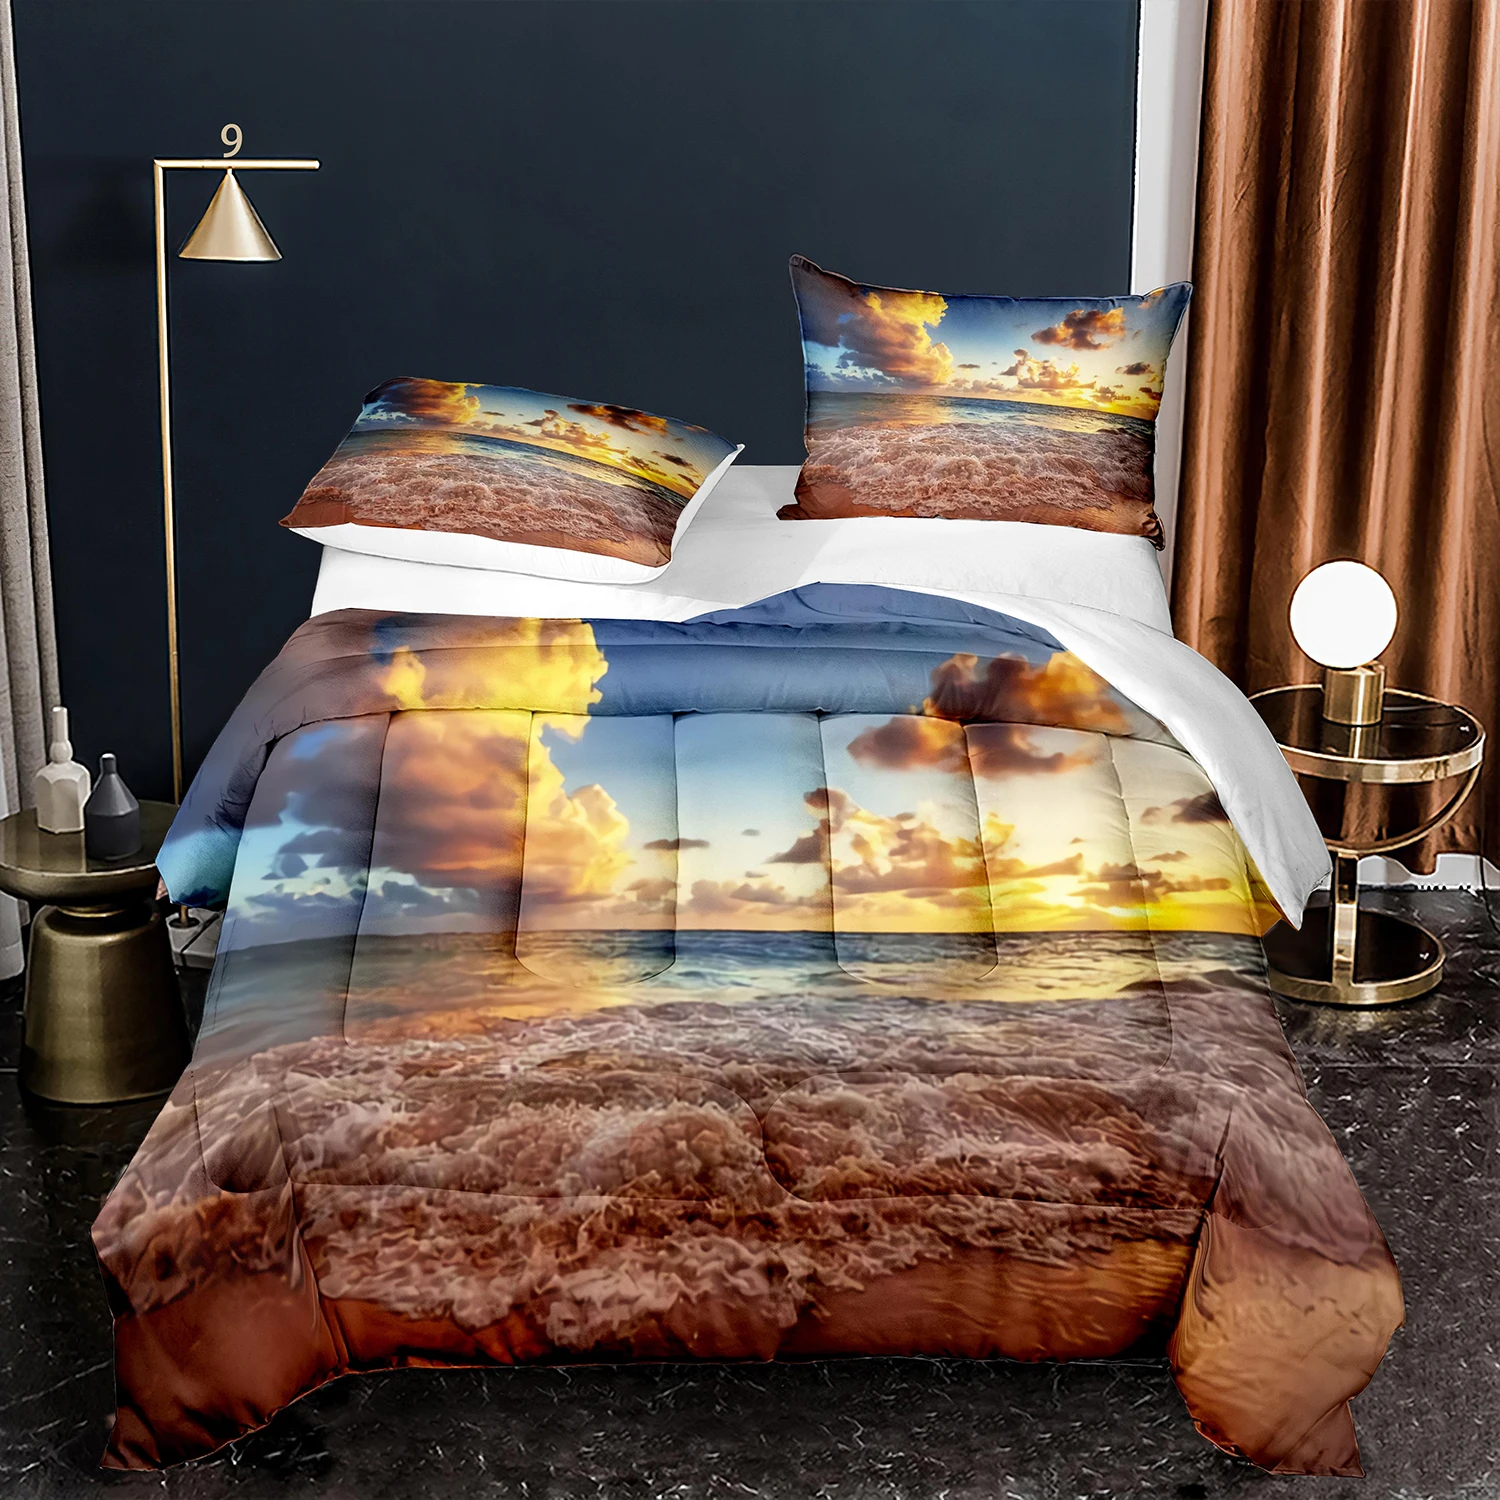 

Size Beach Sunset Reef Natural Landscape Seaside Bedding Set Natural Scenery Theme Quilt Cover Luxury Duvet Cover Set King